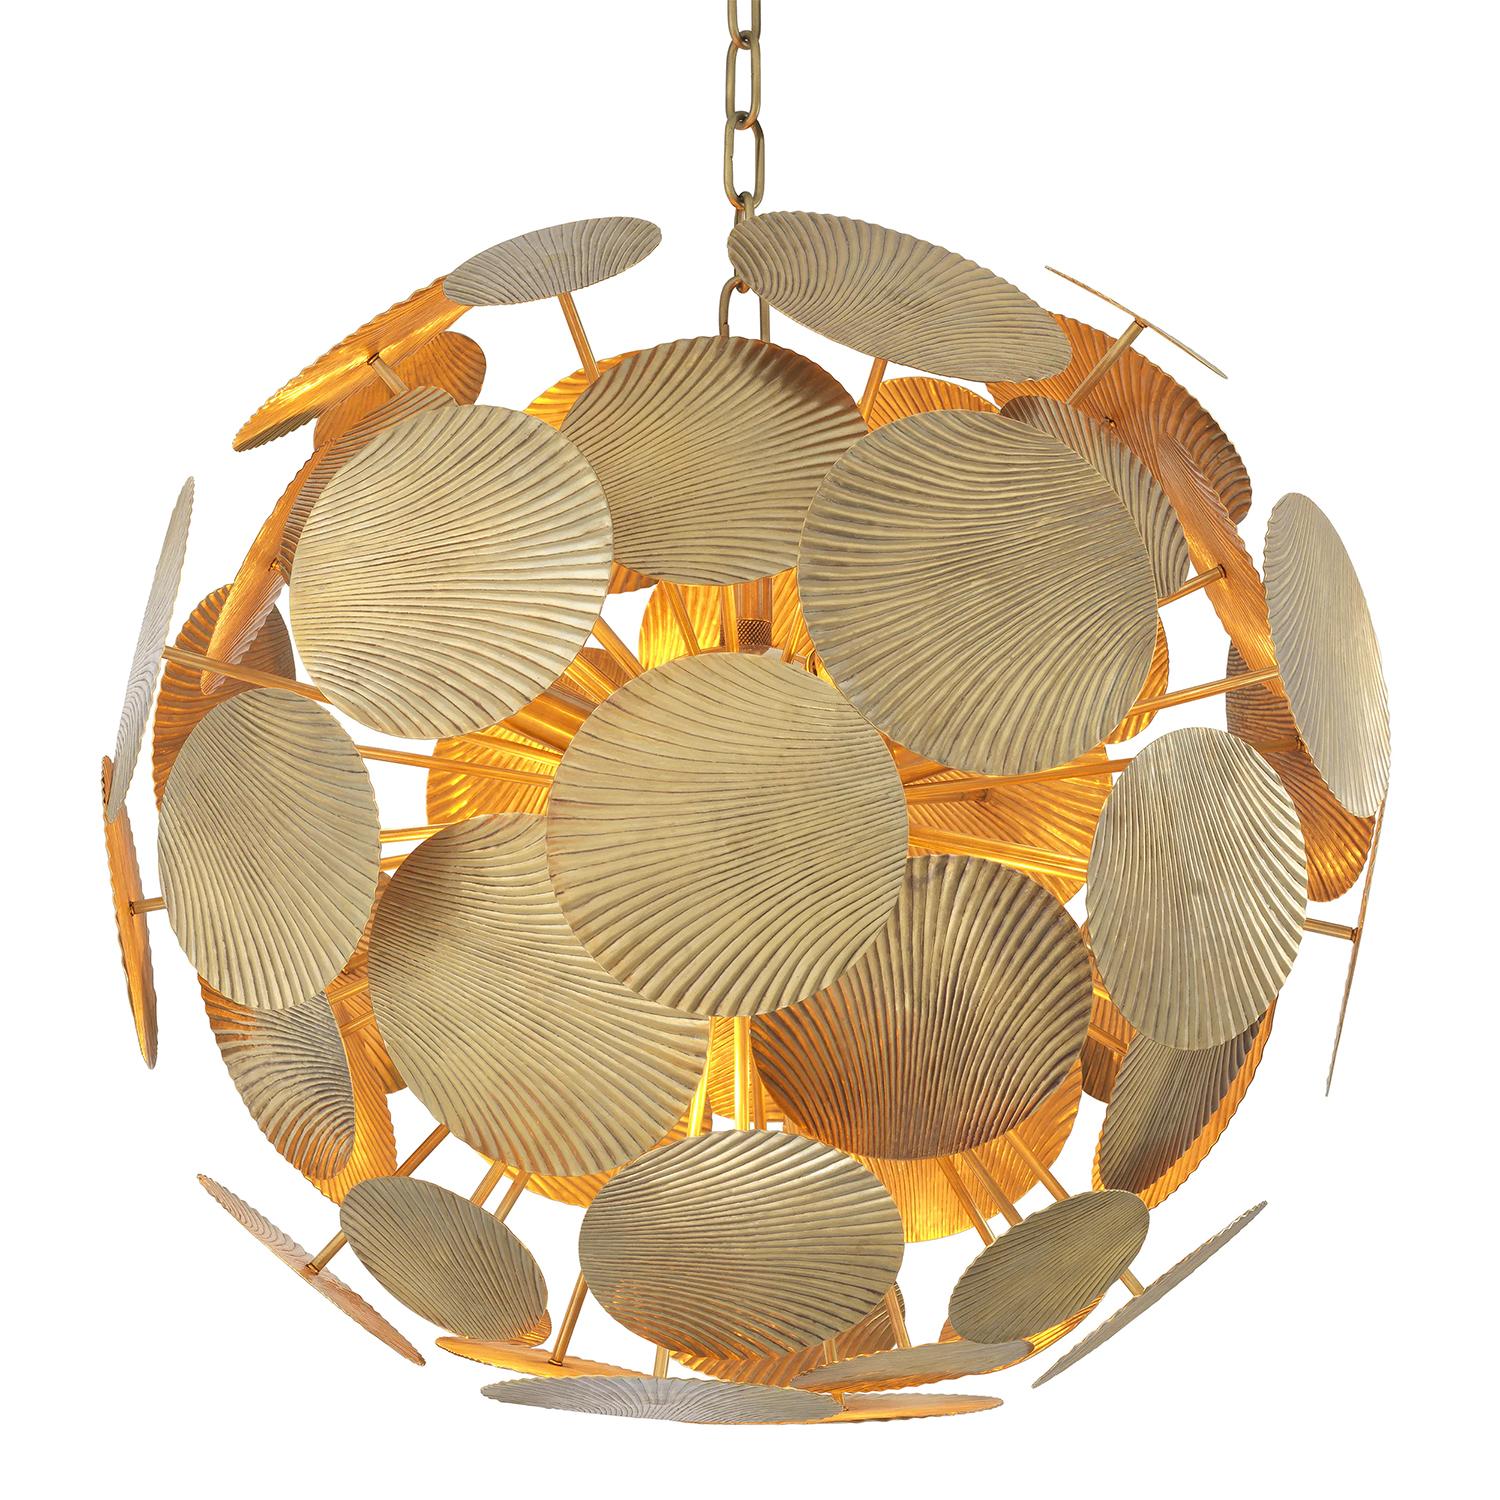 Suspension Basque Large with structure in solid brass
in vintage finish and in stainless steel. 8 bulbs, lamp holder
type E14, max 40 watt, 220-240 Volt. Dimmable, dimmer not
included, bulbs not included. Hanging chain: 200 meters.
Also available in